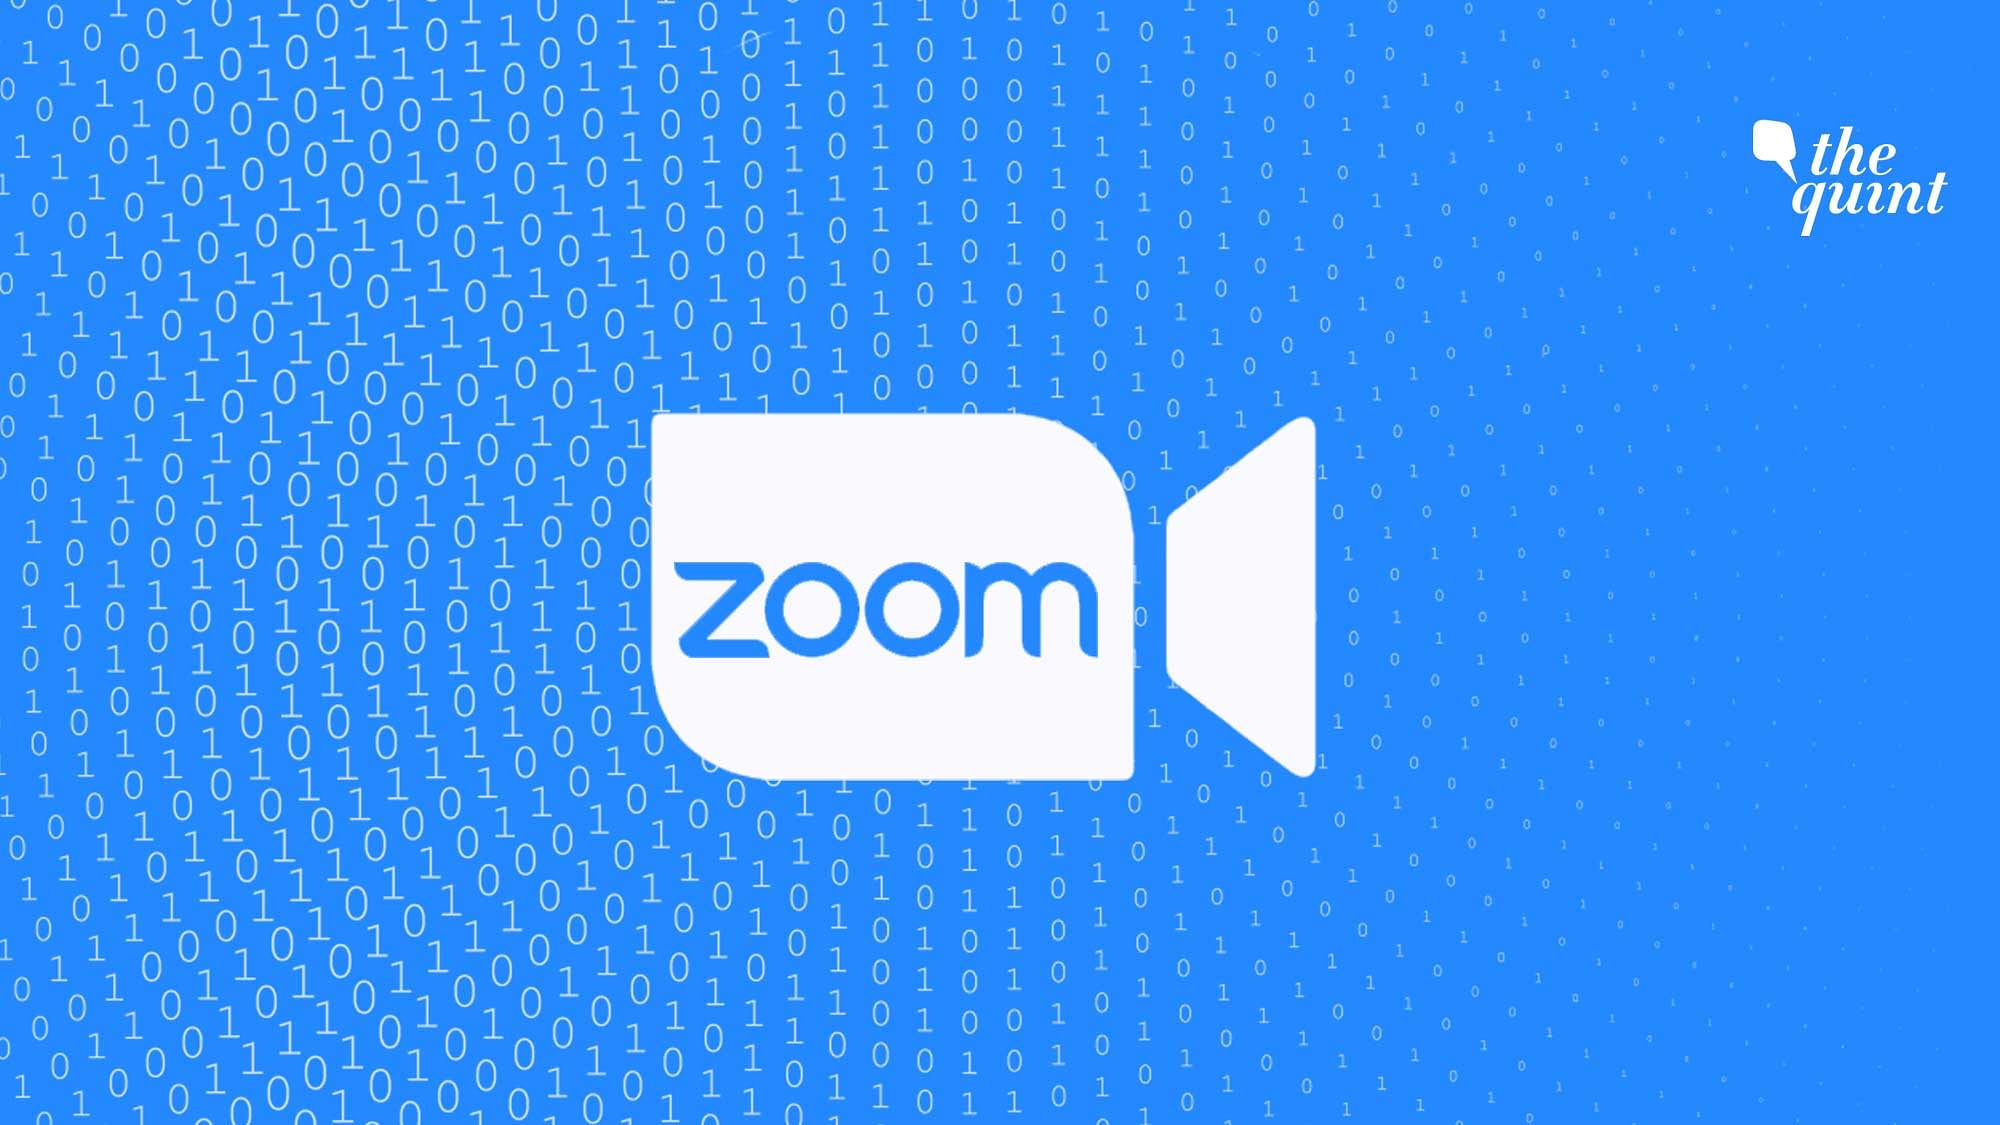 Your Zoom video call may not be as private as you think.